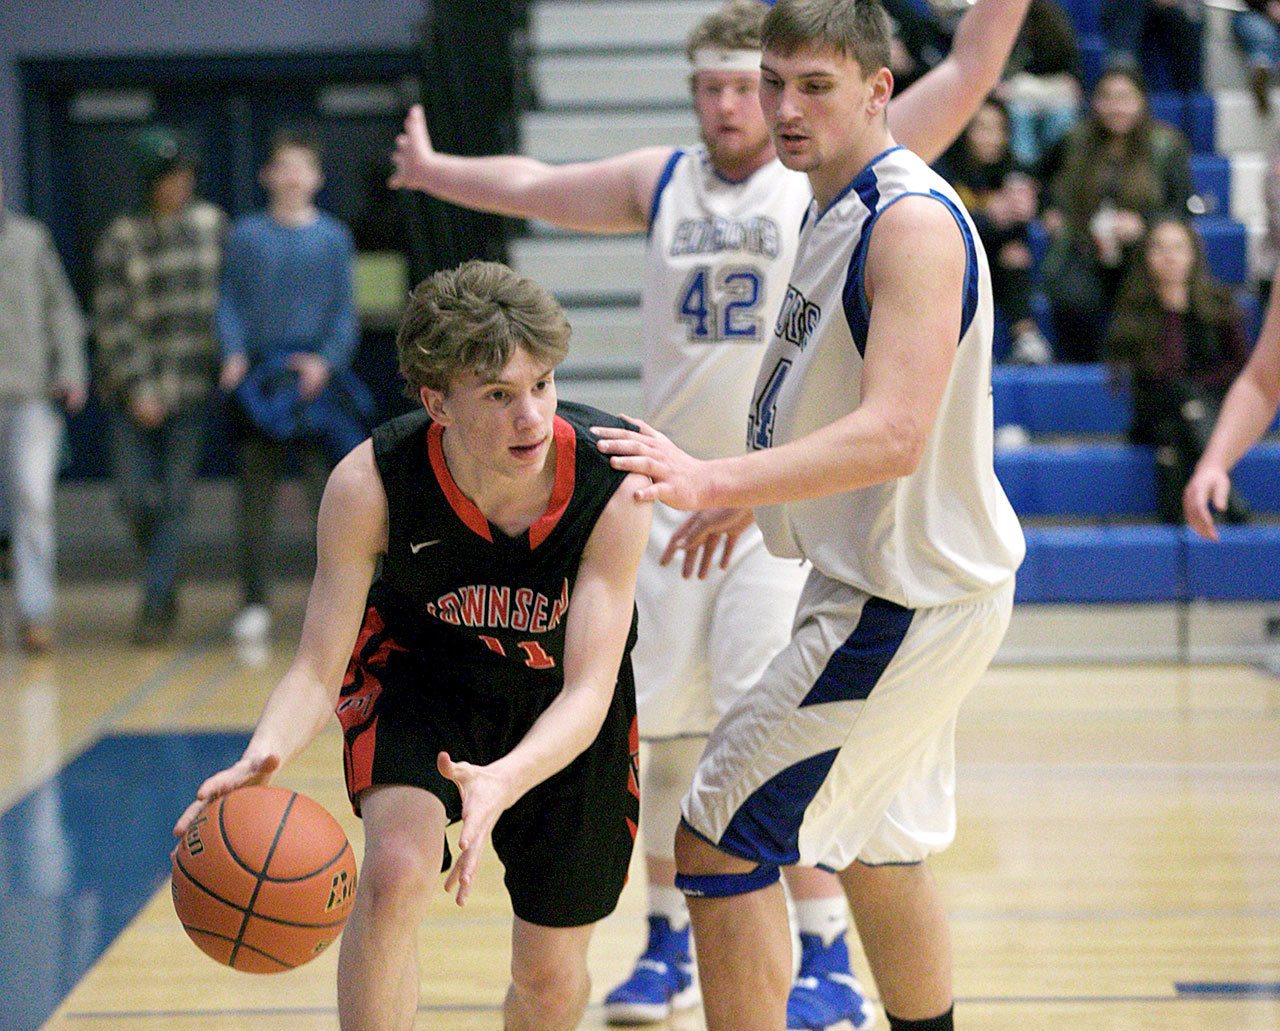 Steve Mullensky/for Peninsula Daily News Port Townsend’s Jaden Watkins dribbles around Chimacum’s Lane Dotson, 42, and Devyn Winkley, during Olympic League action in Chimacum on Tuesday.